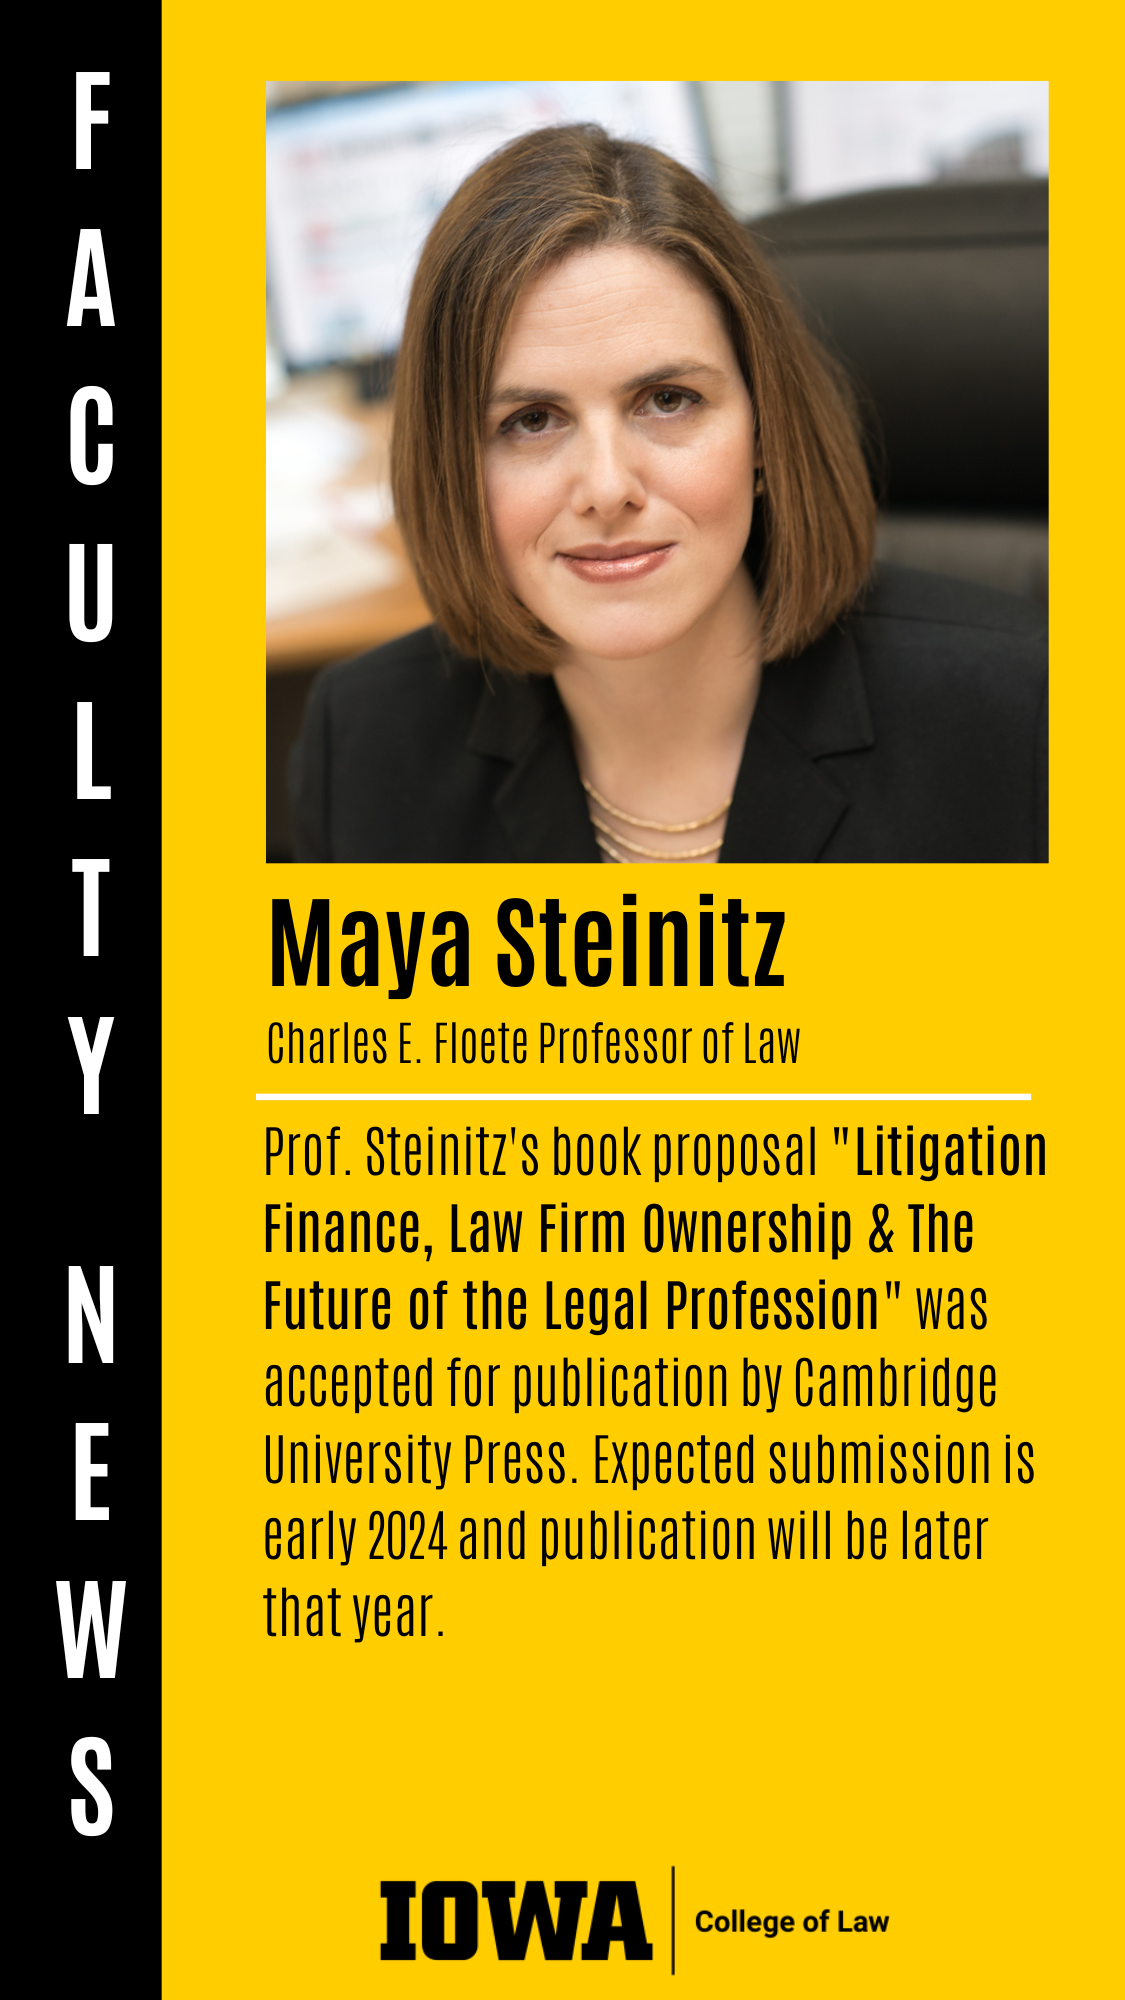 Charles E. Floete Professor of Law Prof. Steinitz's book proposal "Litigation Finance, Law Firm Ownership & The Future of the Legal Profession" was accepted for publication by Cambridge University Press. Expected submission is early 2024 and publication will be later that year. Maya Steinitz